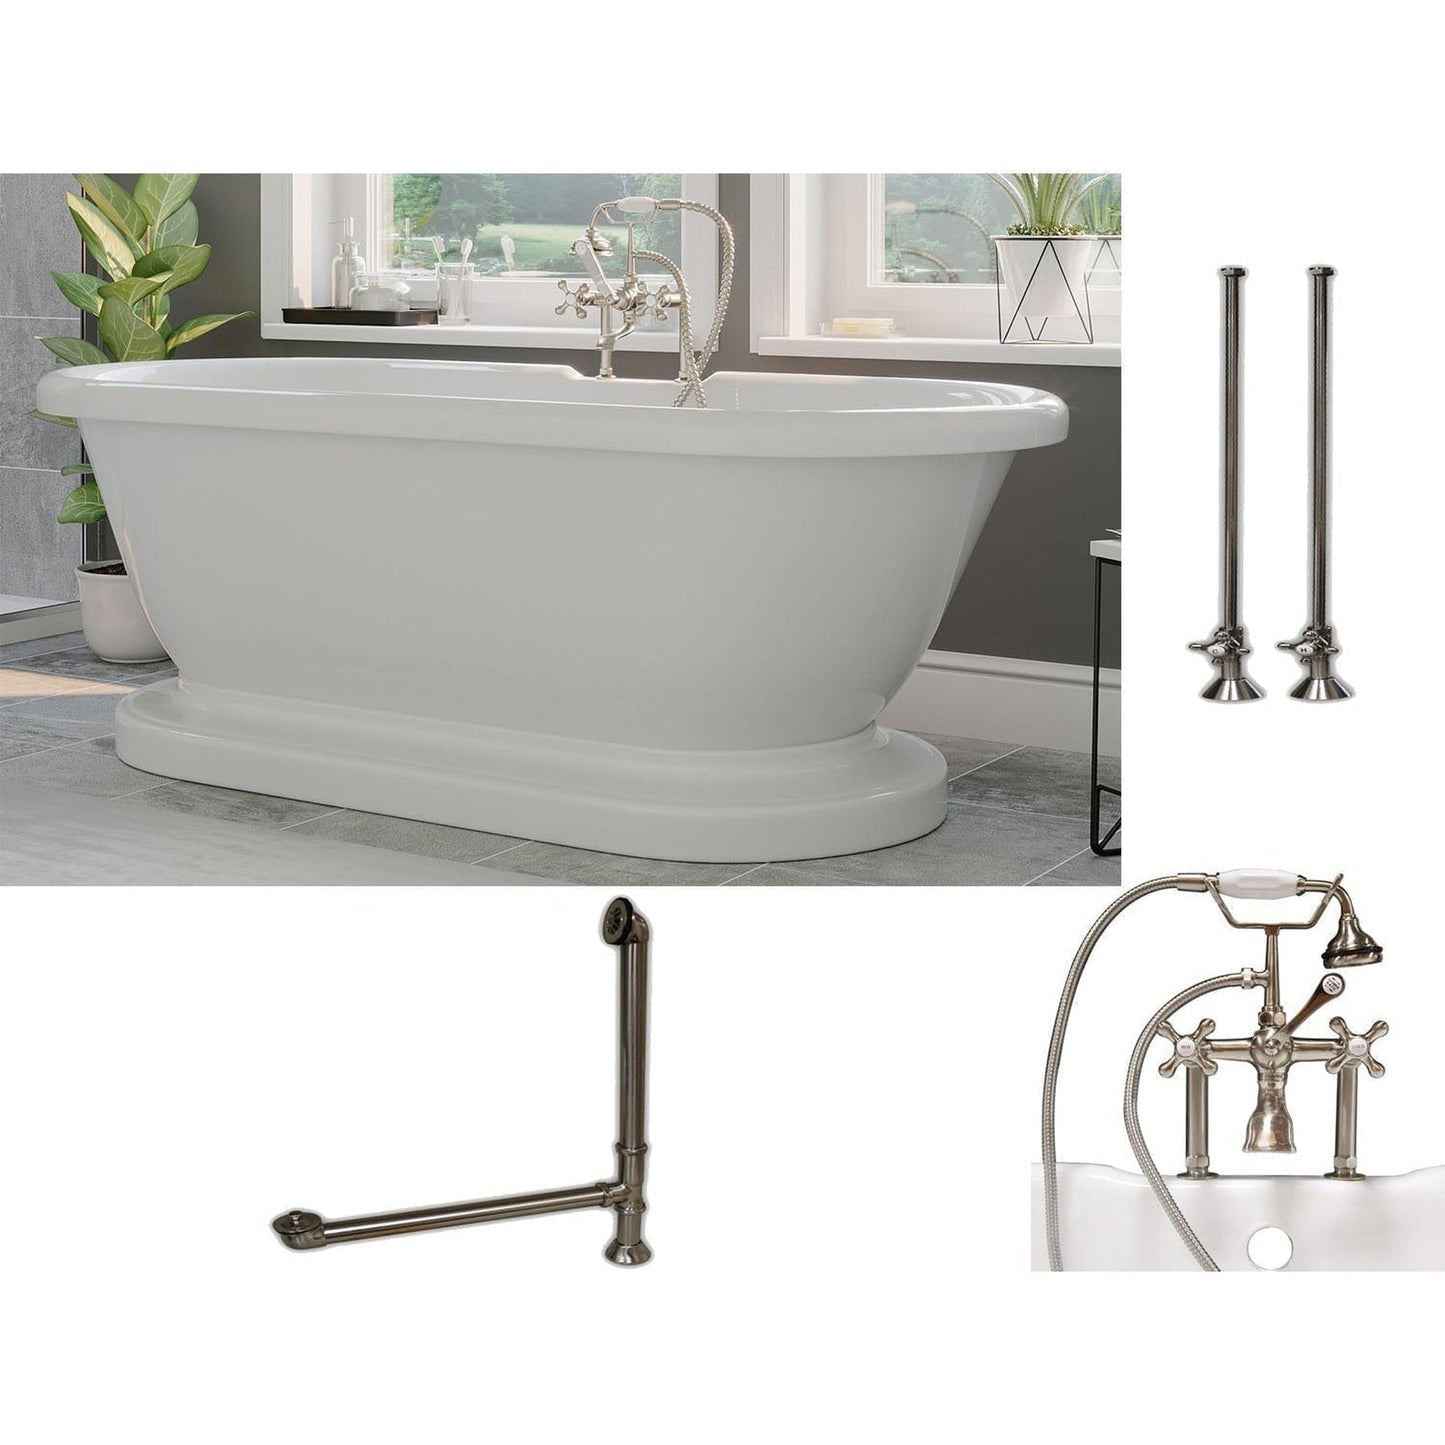 Cambridge Plumbing 70" White Acrylic Double Ended Pedestal Bathtub With Deck Holes And Complete Plumbing Package Including 6” Riser Deck Mount Faucet, Supply Lines, Drain And Overflow Assembly In Brushed Nickel